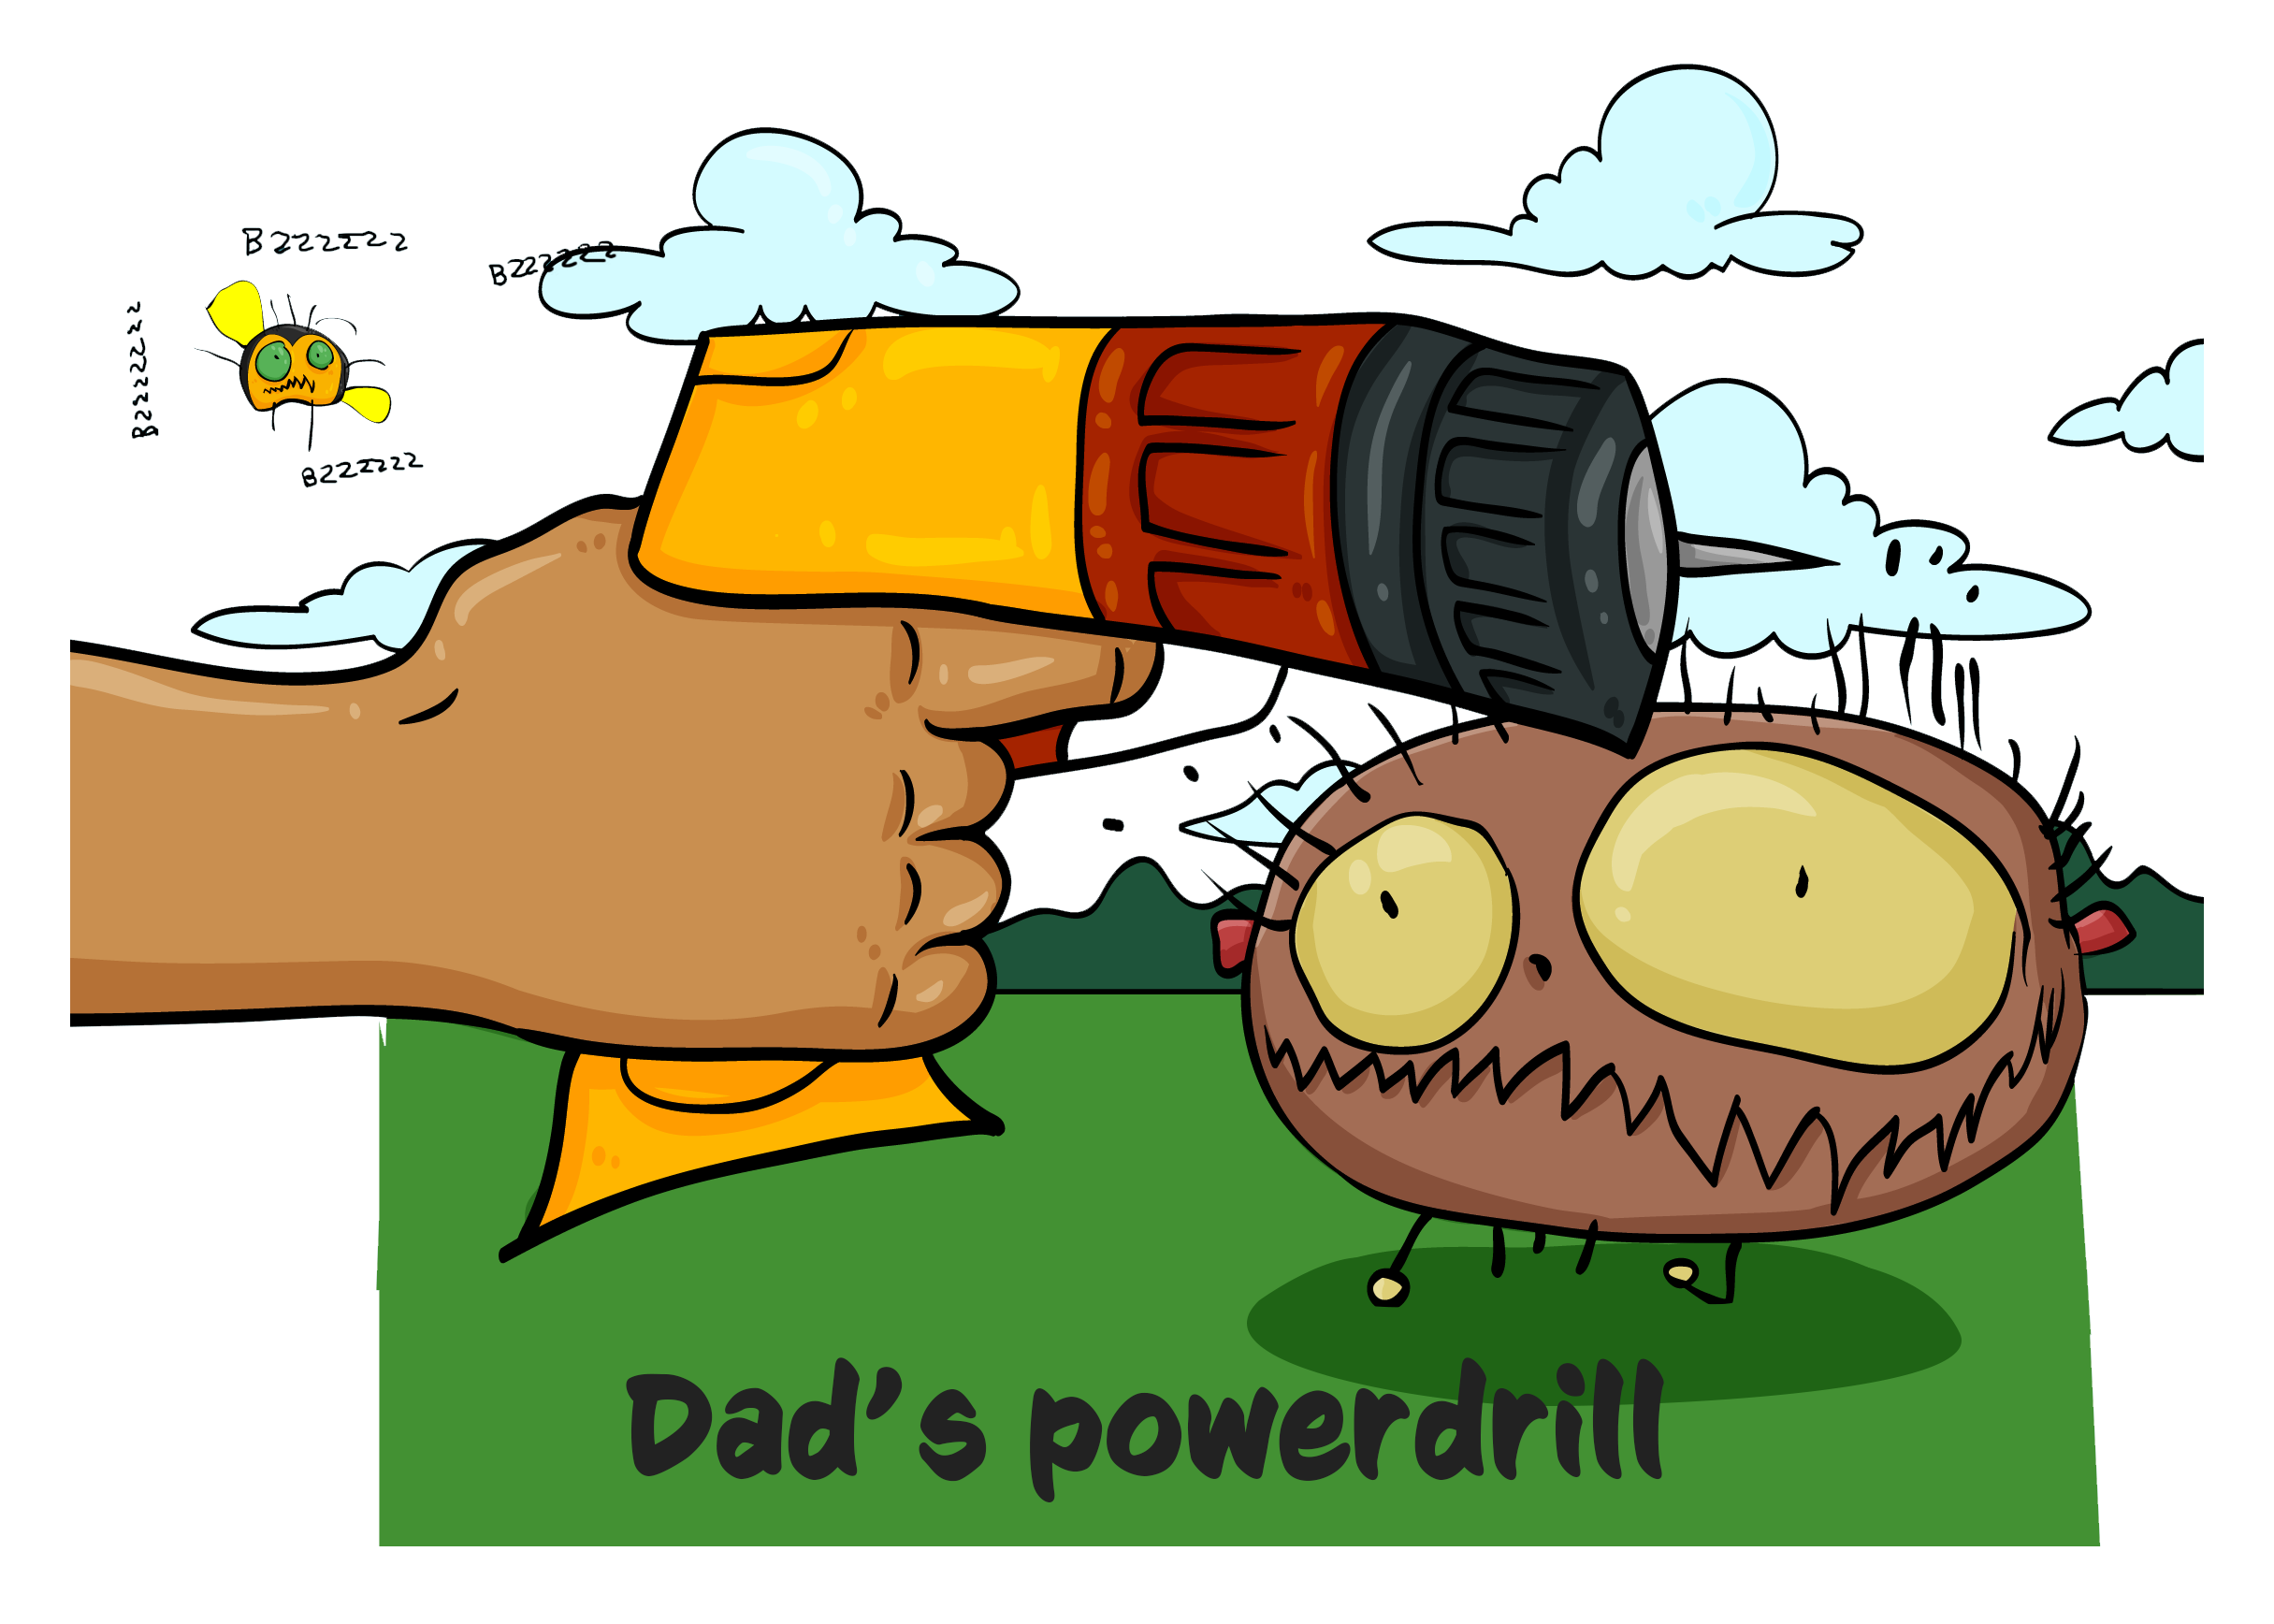 It’s dad’s powerdrill. Oh, how I wish I also had one..